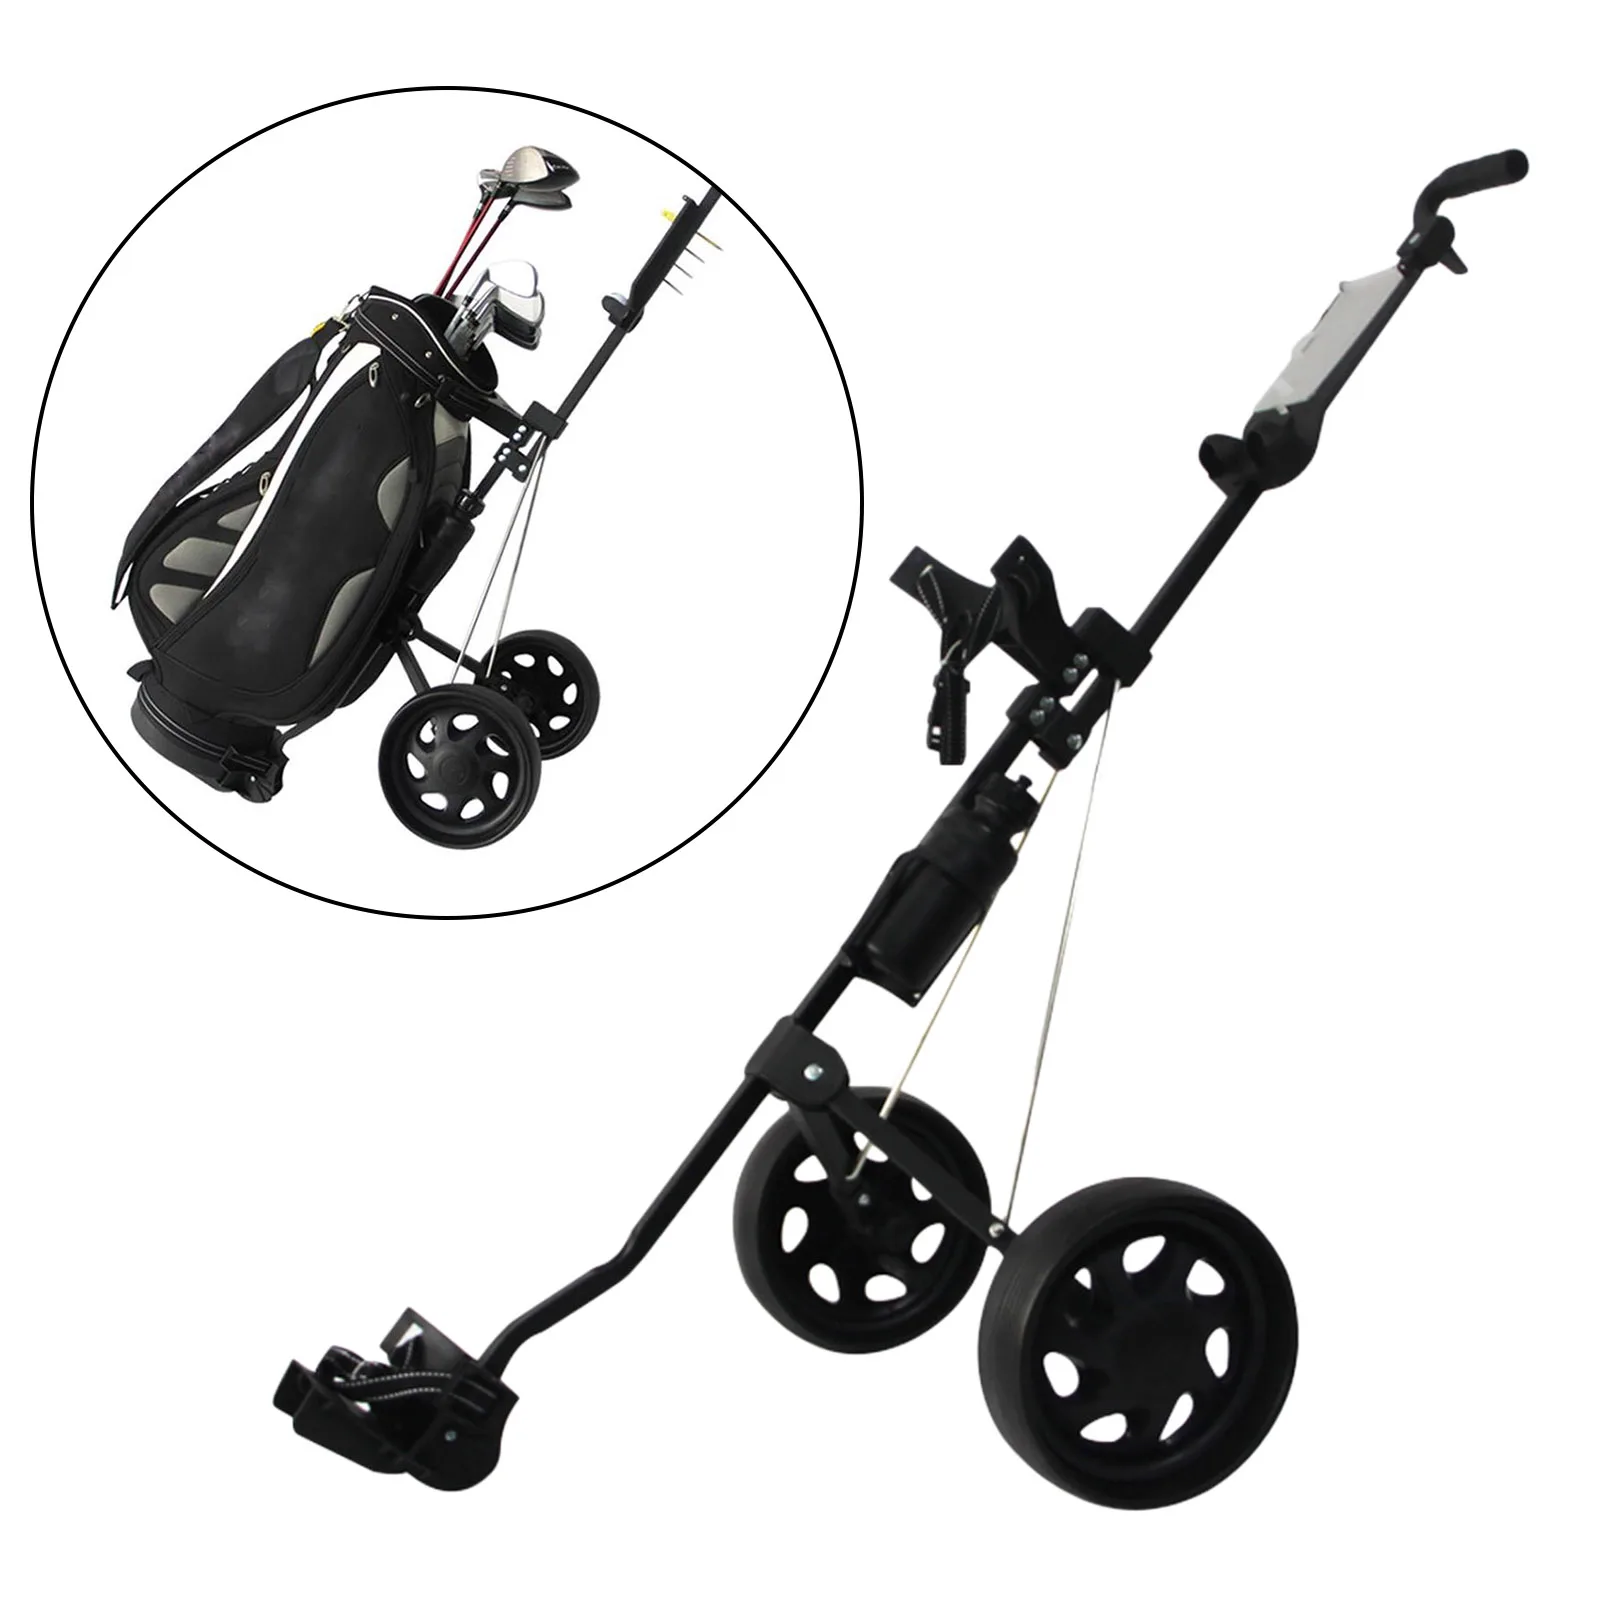 Golf Push Pull Cart Trolley Pushcart Carry Scorecard Bottle Cages Equipment